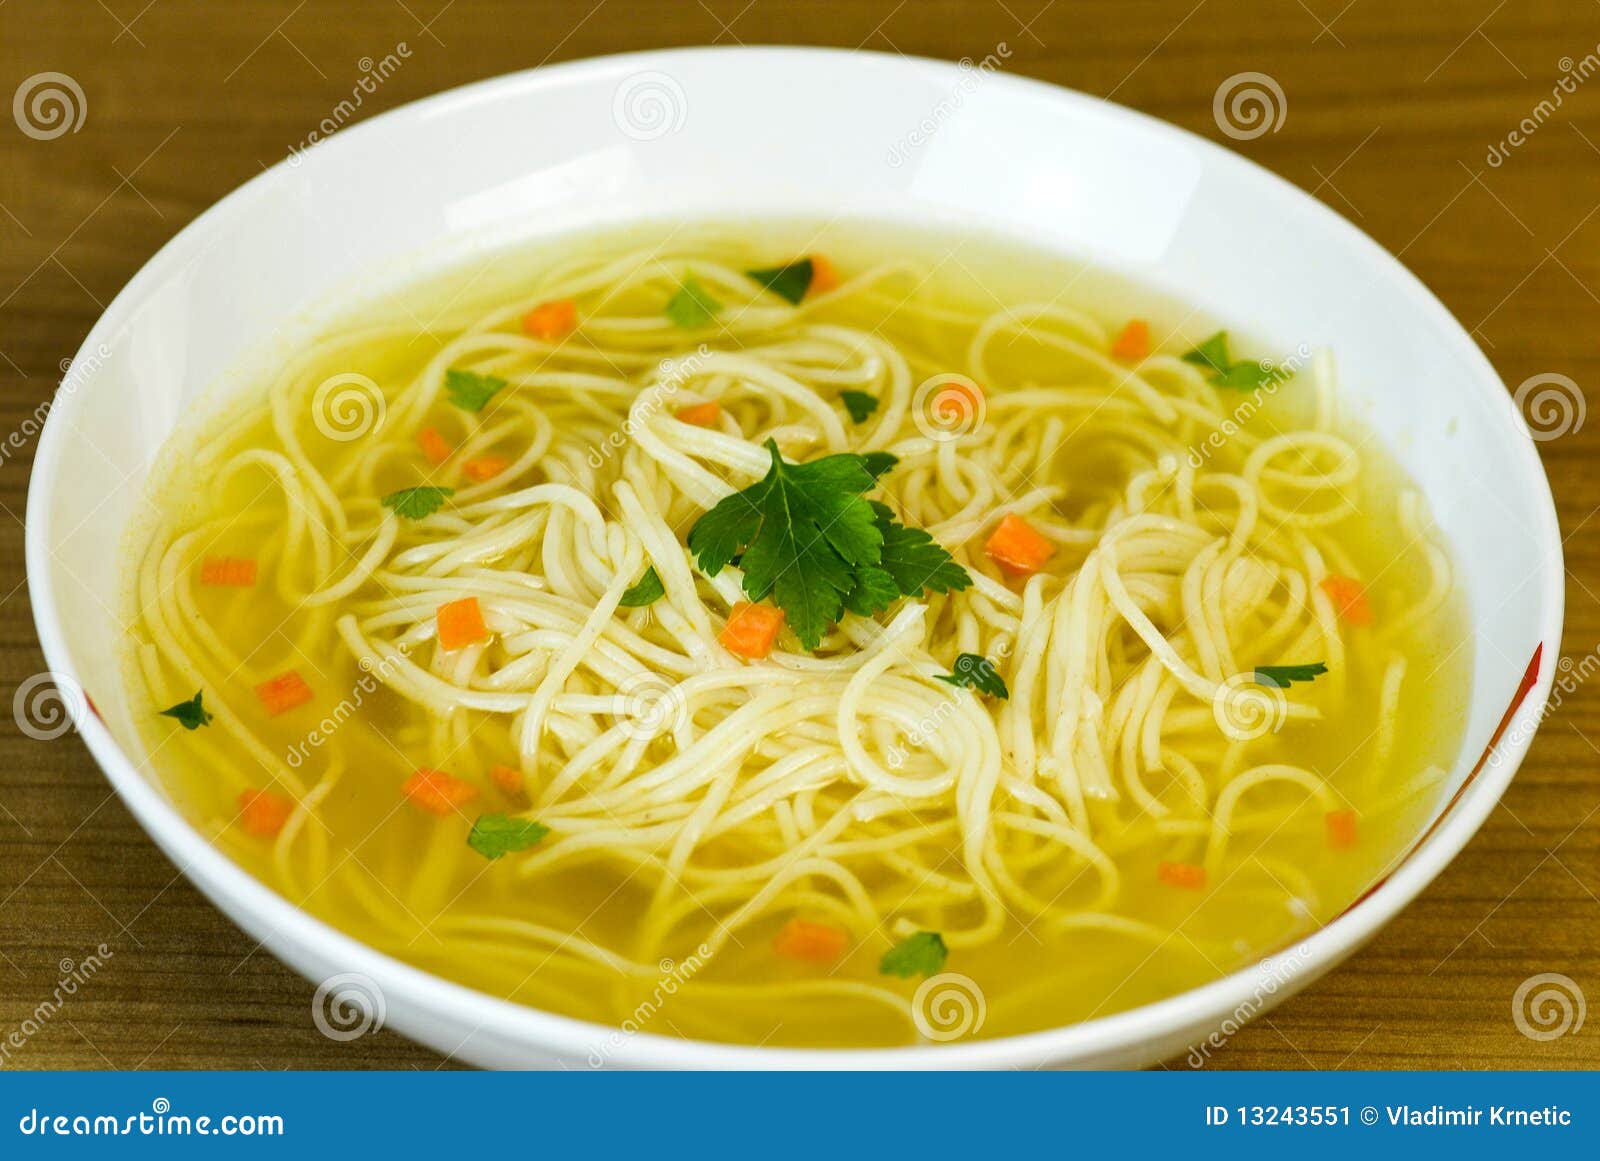 noodle soup in white bowl